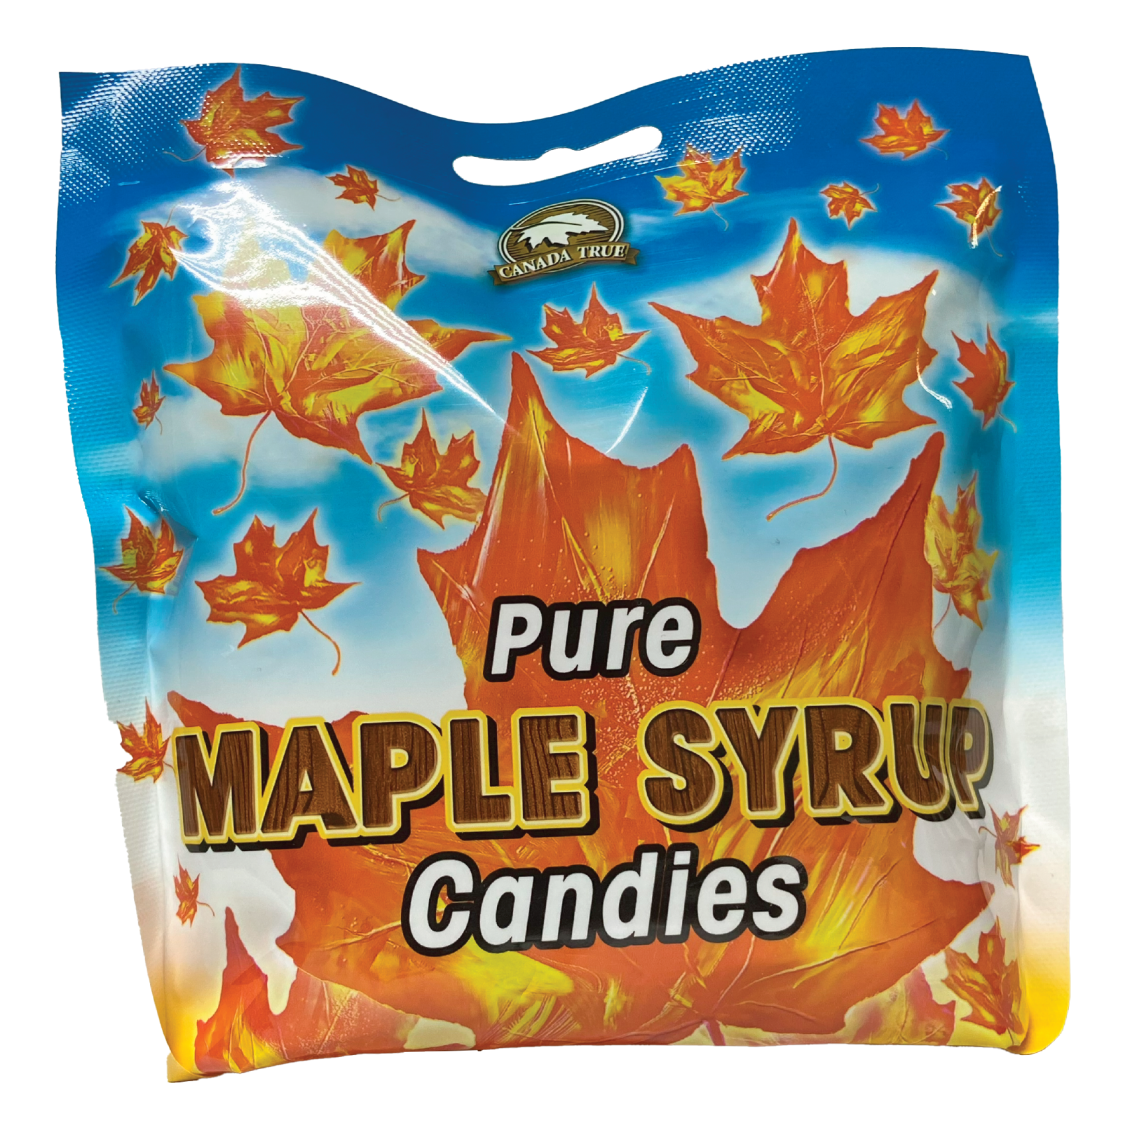 Canada True Maple Syrup Candies